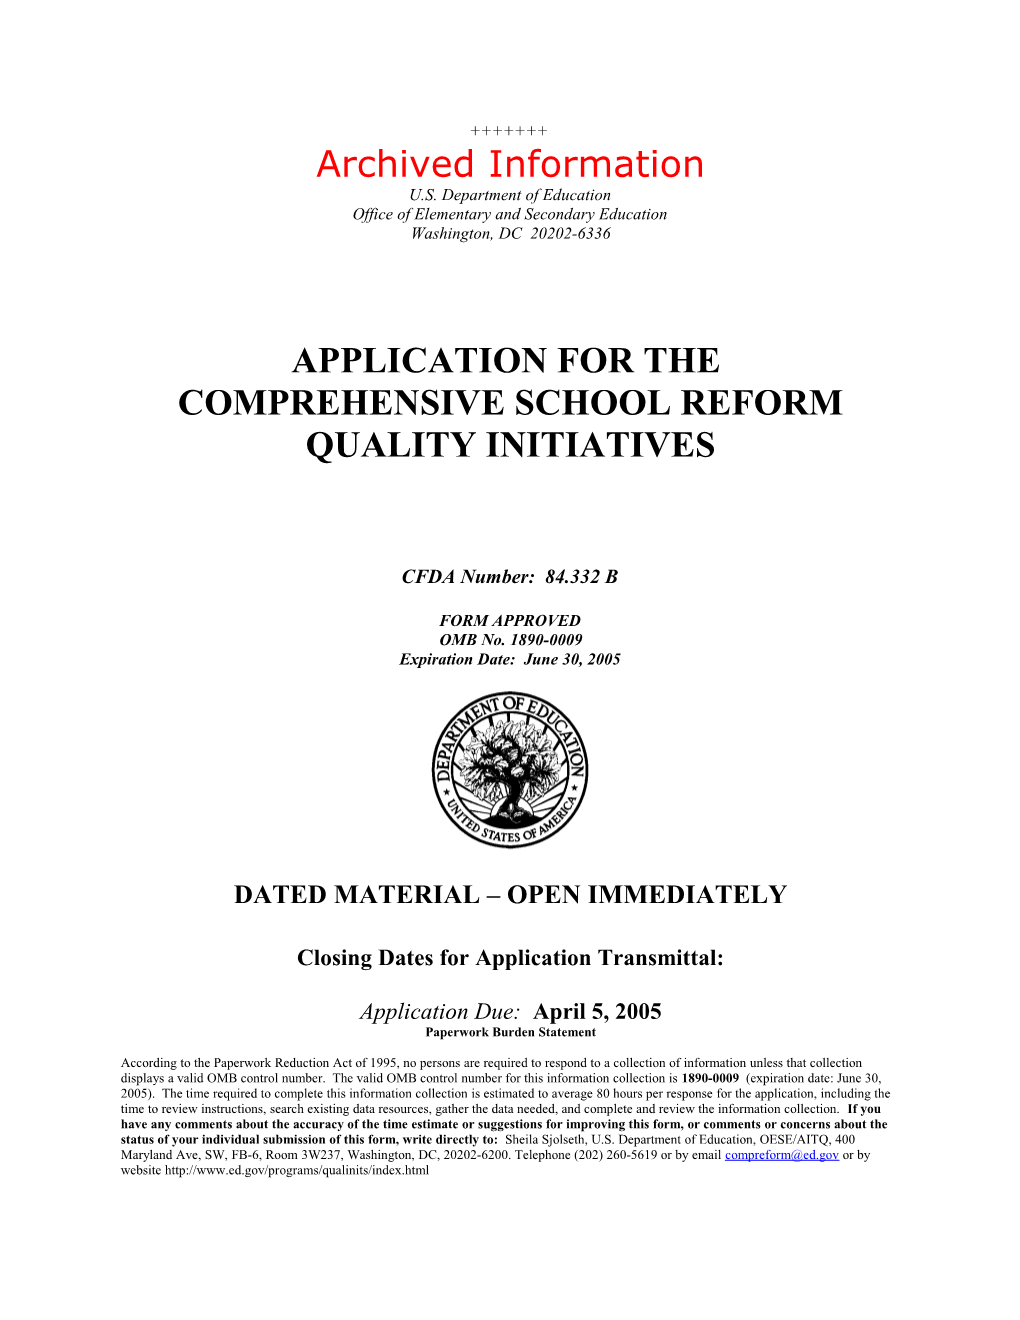 Archived: Application for the Comprehensive School Reform Quality Initiatives (MS Word)